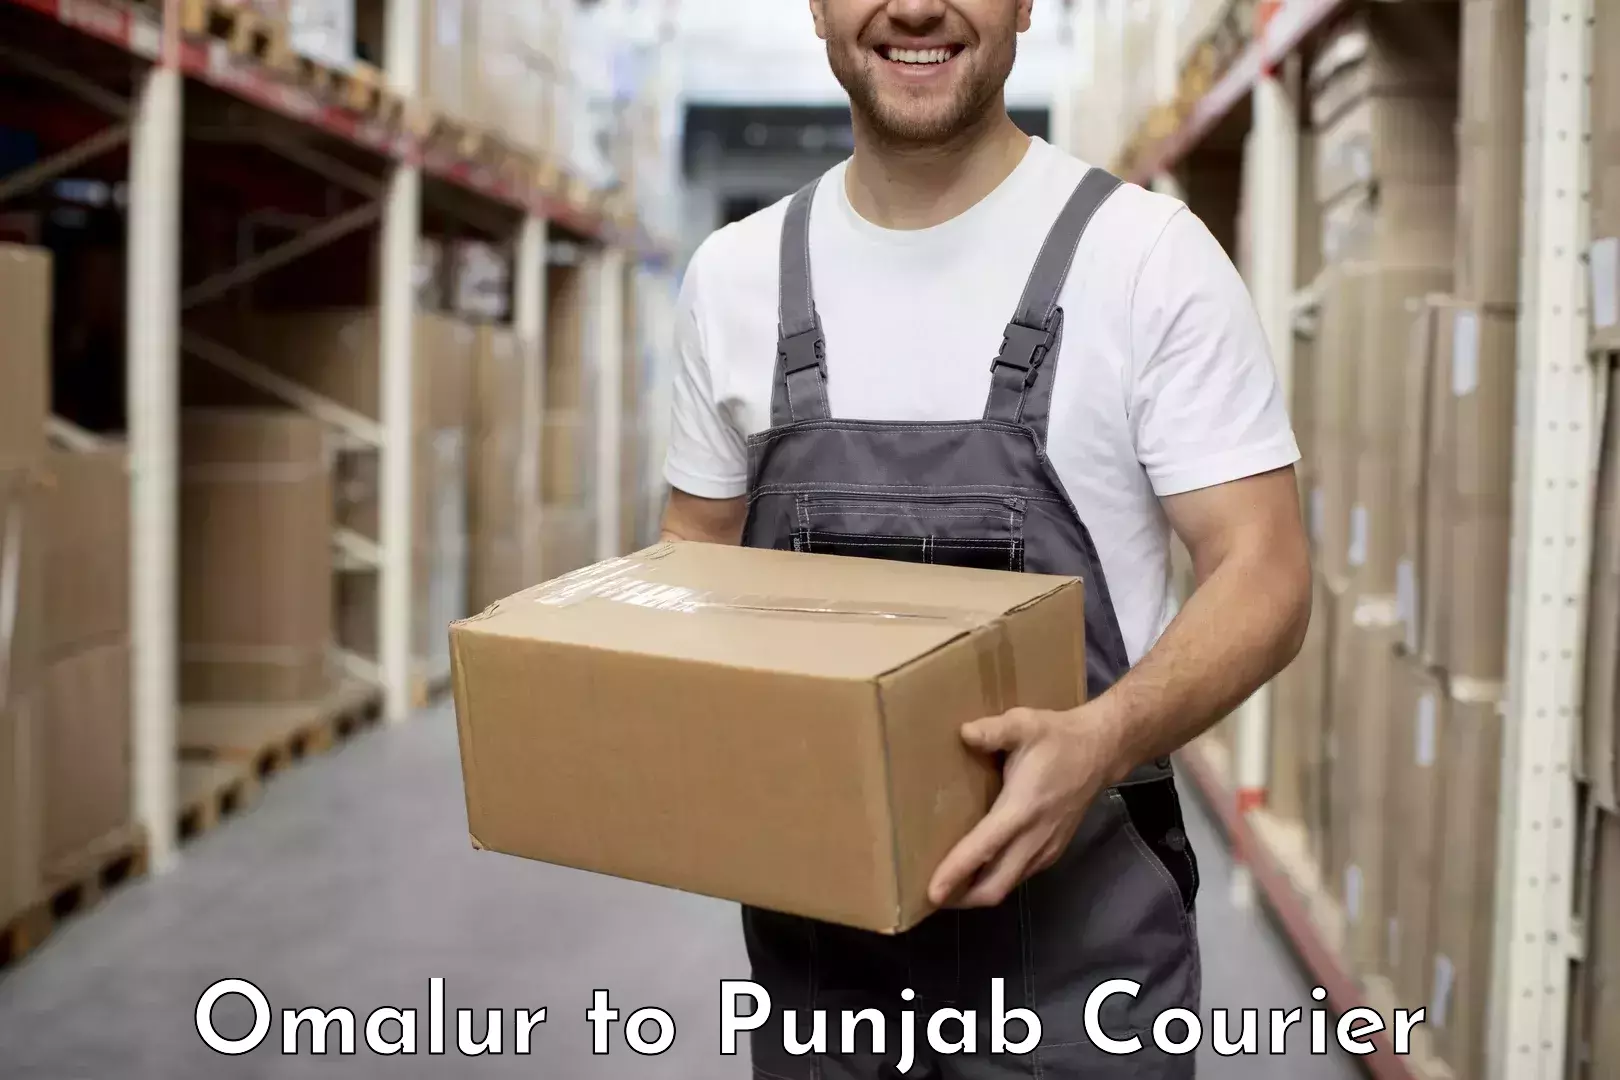 Efficient order fulfillment in Omalur to Ajnala